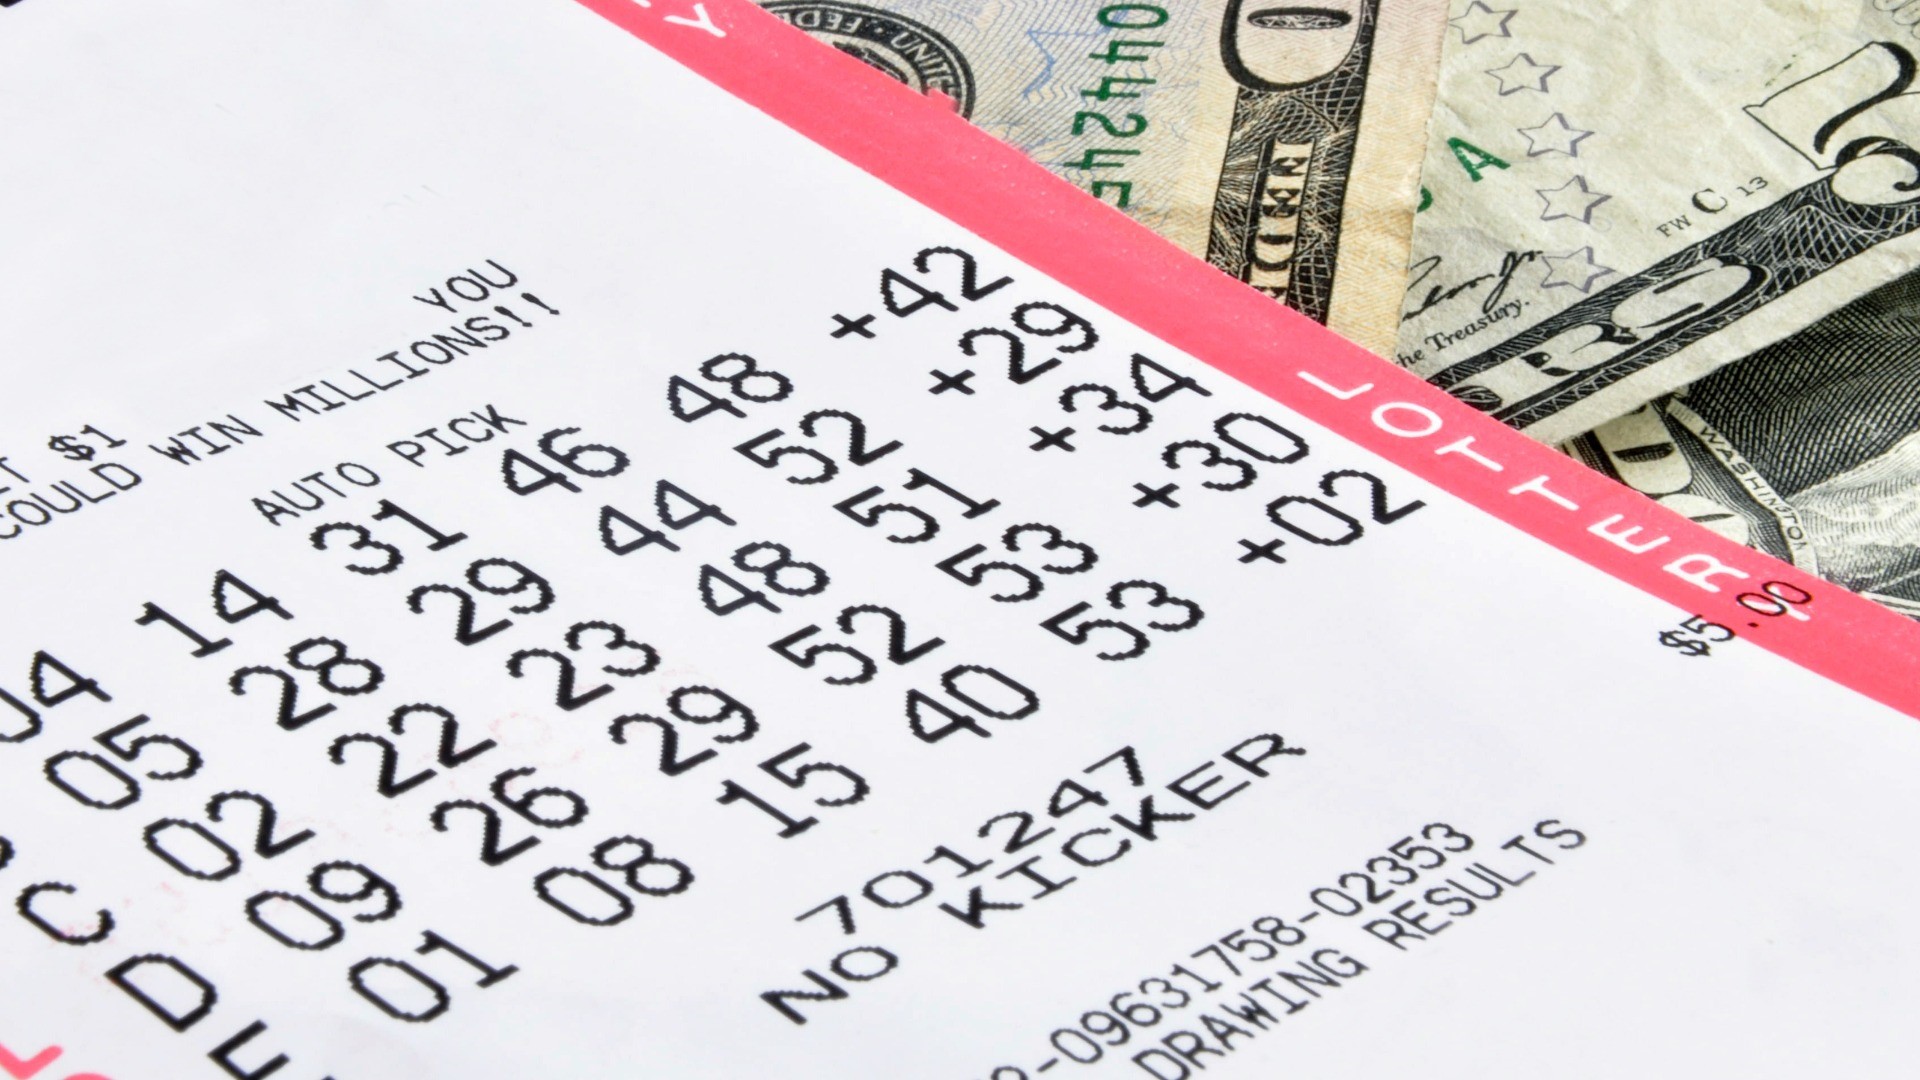 The new law makes it a misdemeanor crime for lottery officials and contractors to publicly release winners' names, addresses or other identifying information